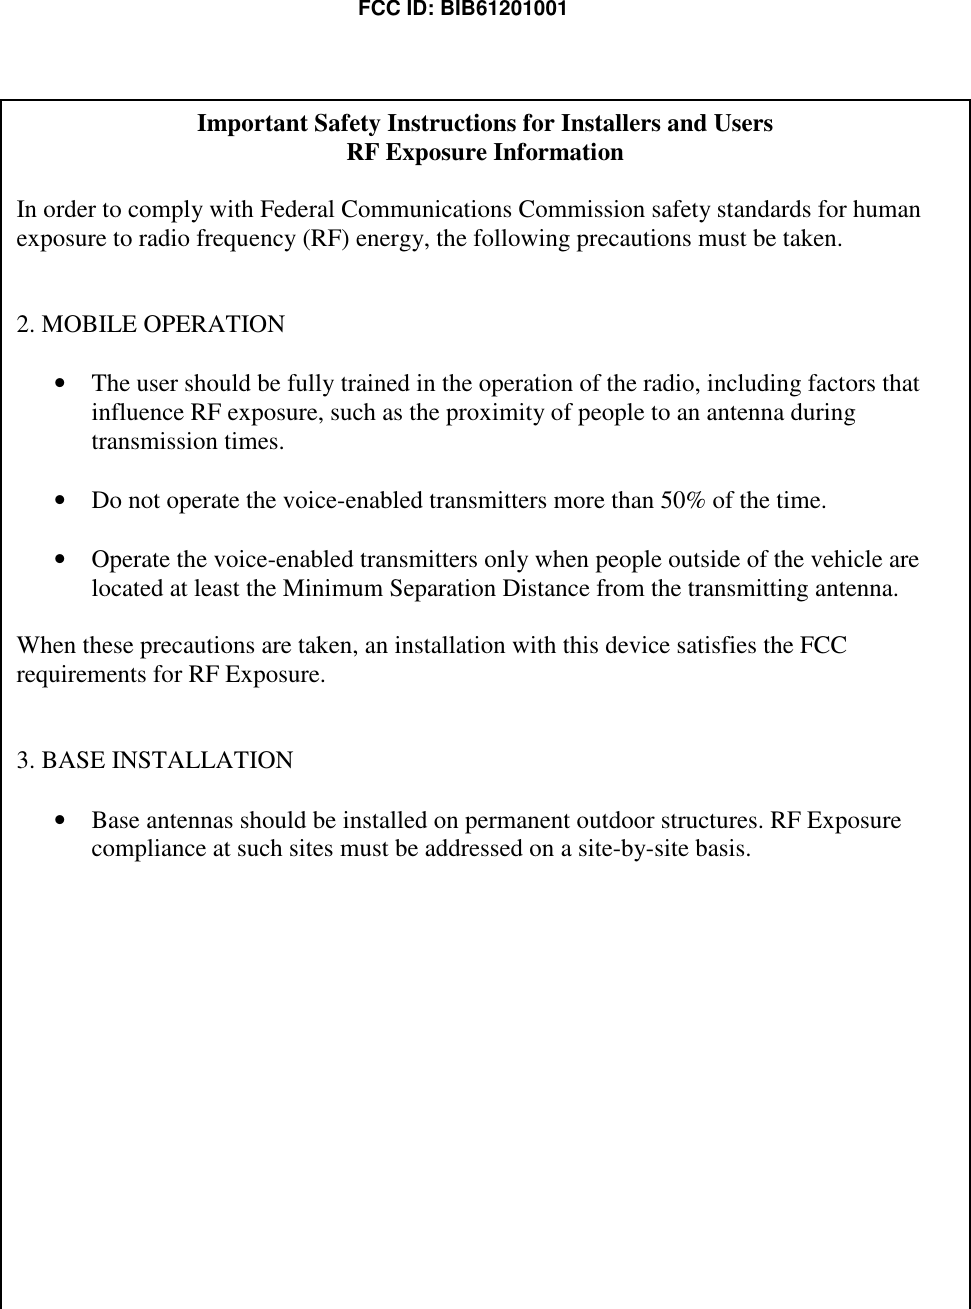  FCC ID: BIB61201001 Important Safety Instructions for Installers and Users RF Exposure Information  In order to comply with Federal Communications Commission safety standards for human exposure to radio frequency (RF) energy, the following precautions must be taken.  2. MOBILE OPERATION  • The user should be fully trained in the operation of the radio, including factors that influence RF exposure, such as the proximity of people to an antenna during transmission times.  • Do not operate the voice-enabled transmitters more than 50% of the time.  • Operate the voice-enabled transmitters only when people outside of the vehicle are located at least the Minimum Separation Distance from the transmitting antenna.  When these precautions are taken, an installation with this device satisfies the FCC requirements for RF Exposure.   3. BASE INSTALLATION  • Base antennas should be installed on permanent outdoor structures. RF Exposure compliance at such sites must be addressed on a site-by-site basis.  